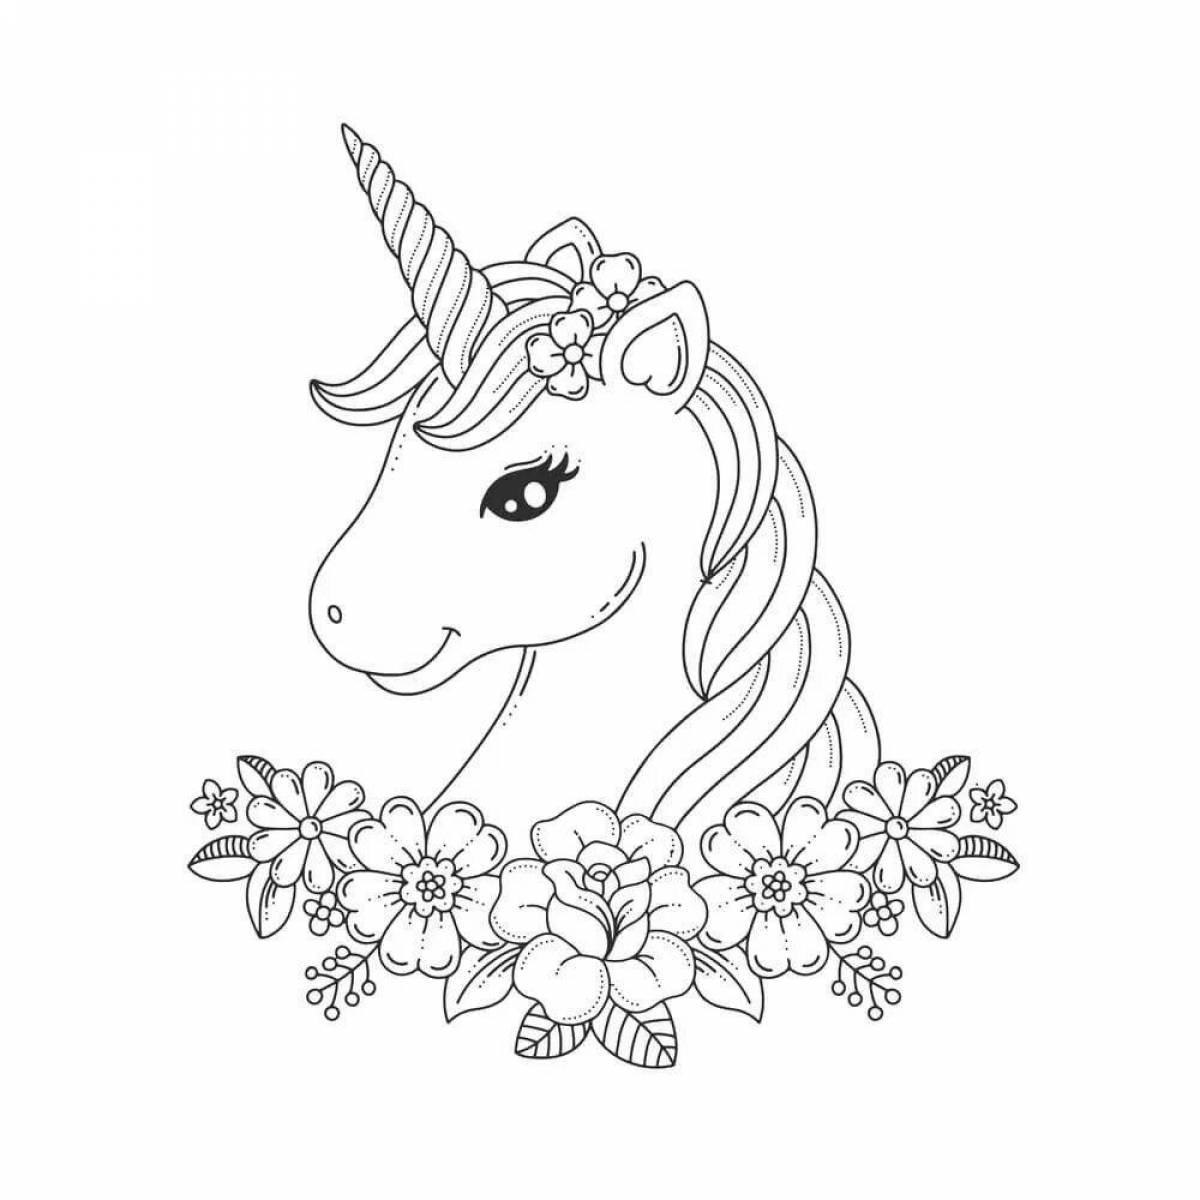 Brilliantly coloring page how to draw a unicorn